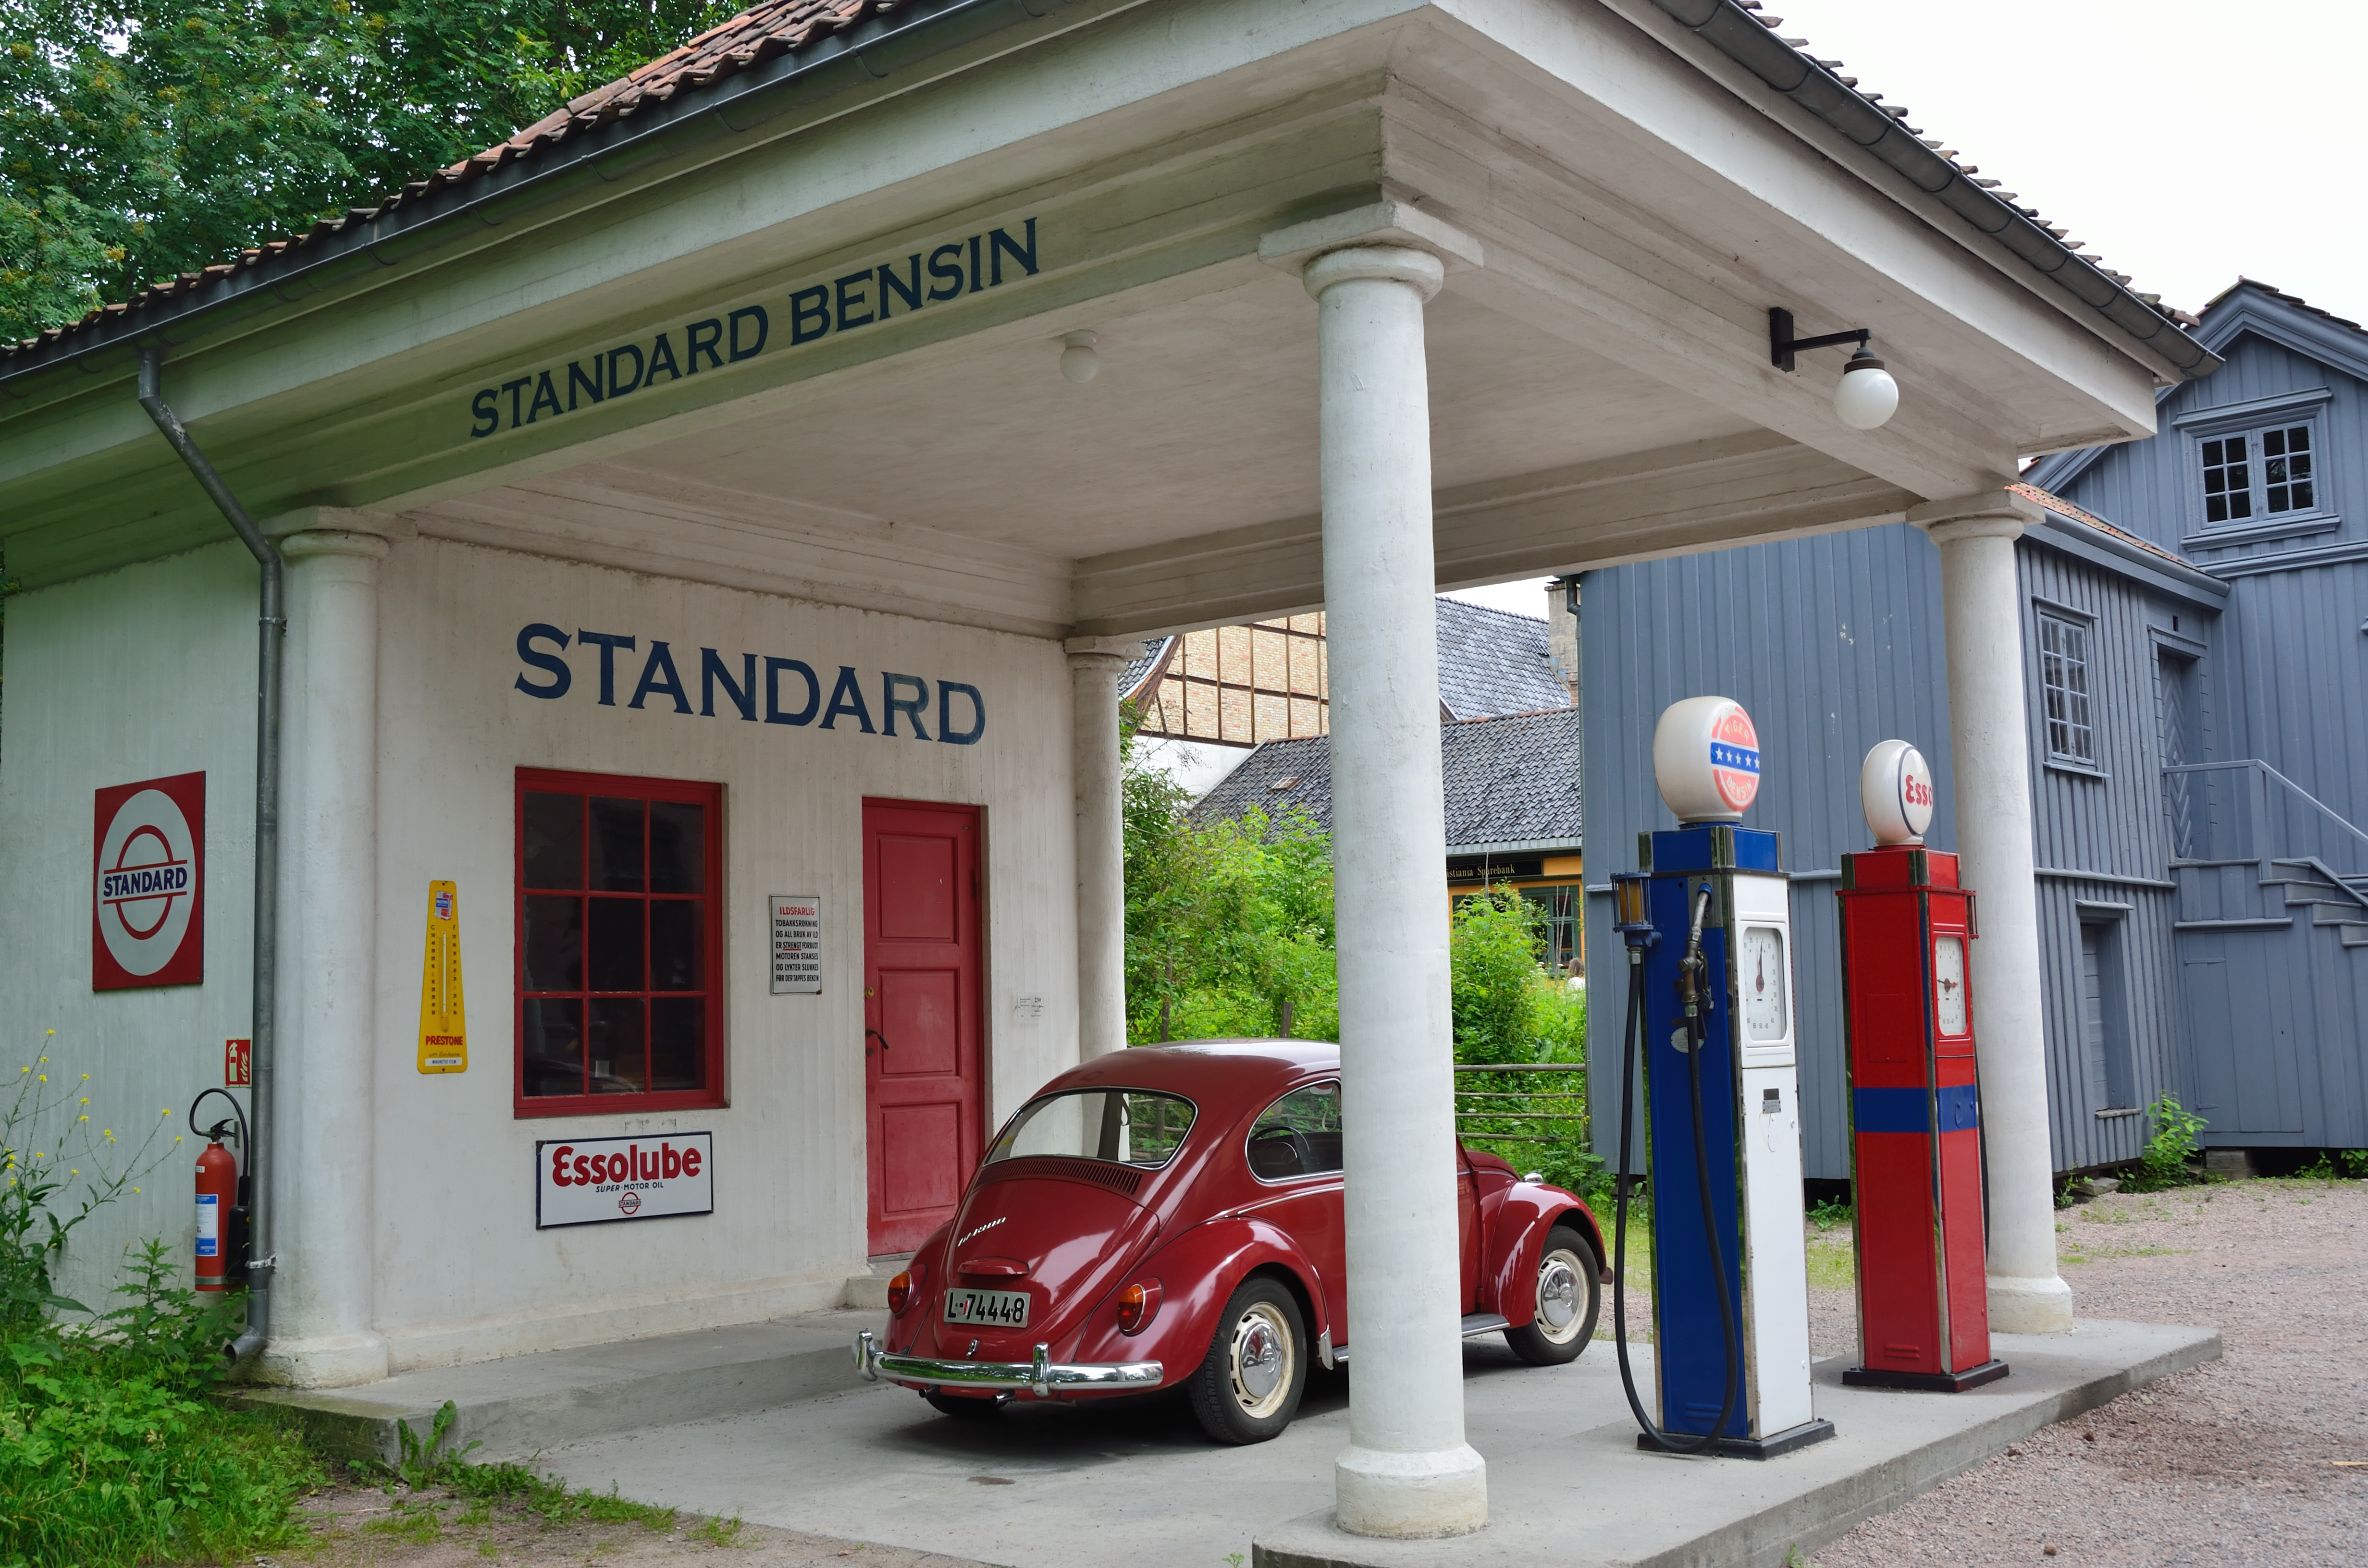 File:Old Petrol Station at at Norsk Folkemuseum.jpg - Wikimedia Commons